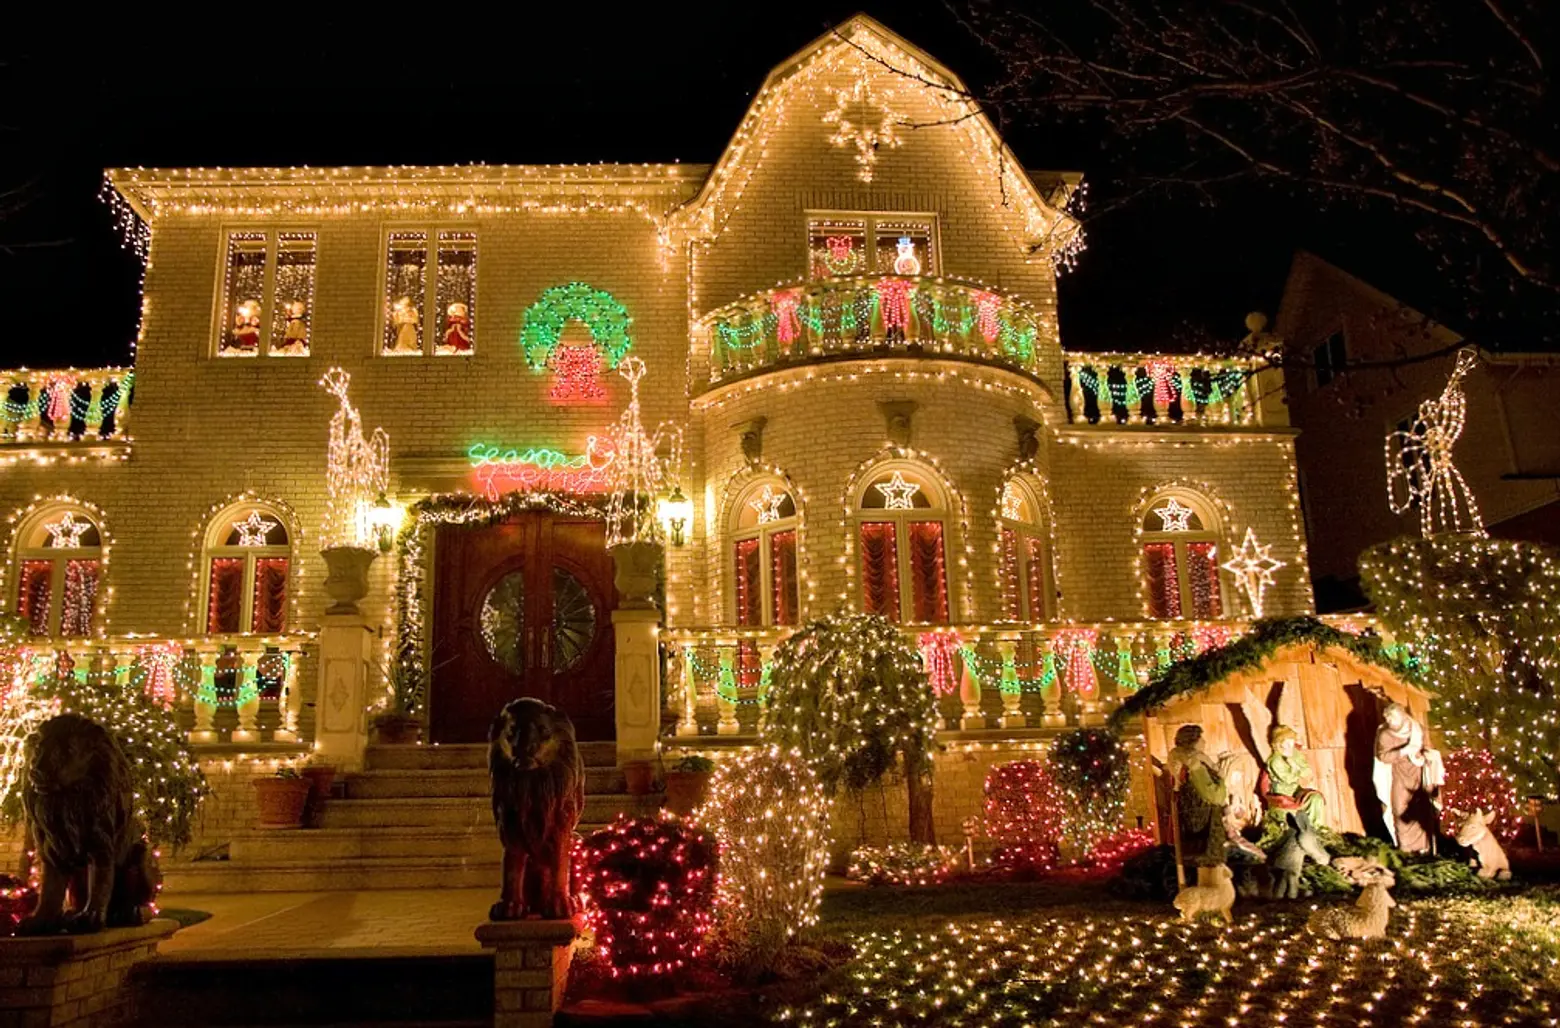 Dyker Heights Christmas lights, A Slice of Brooklyn Bus Tours